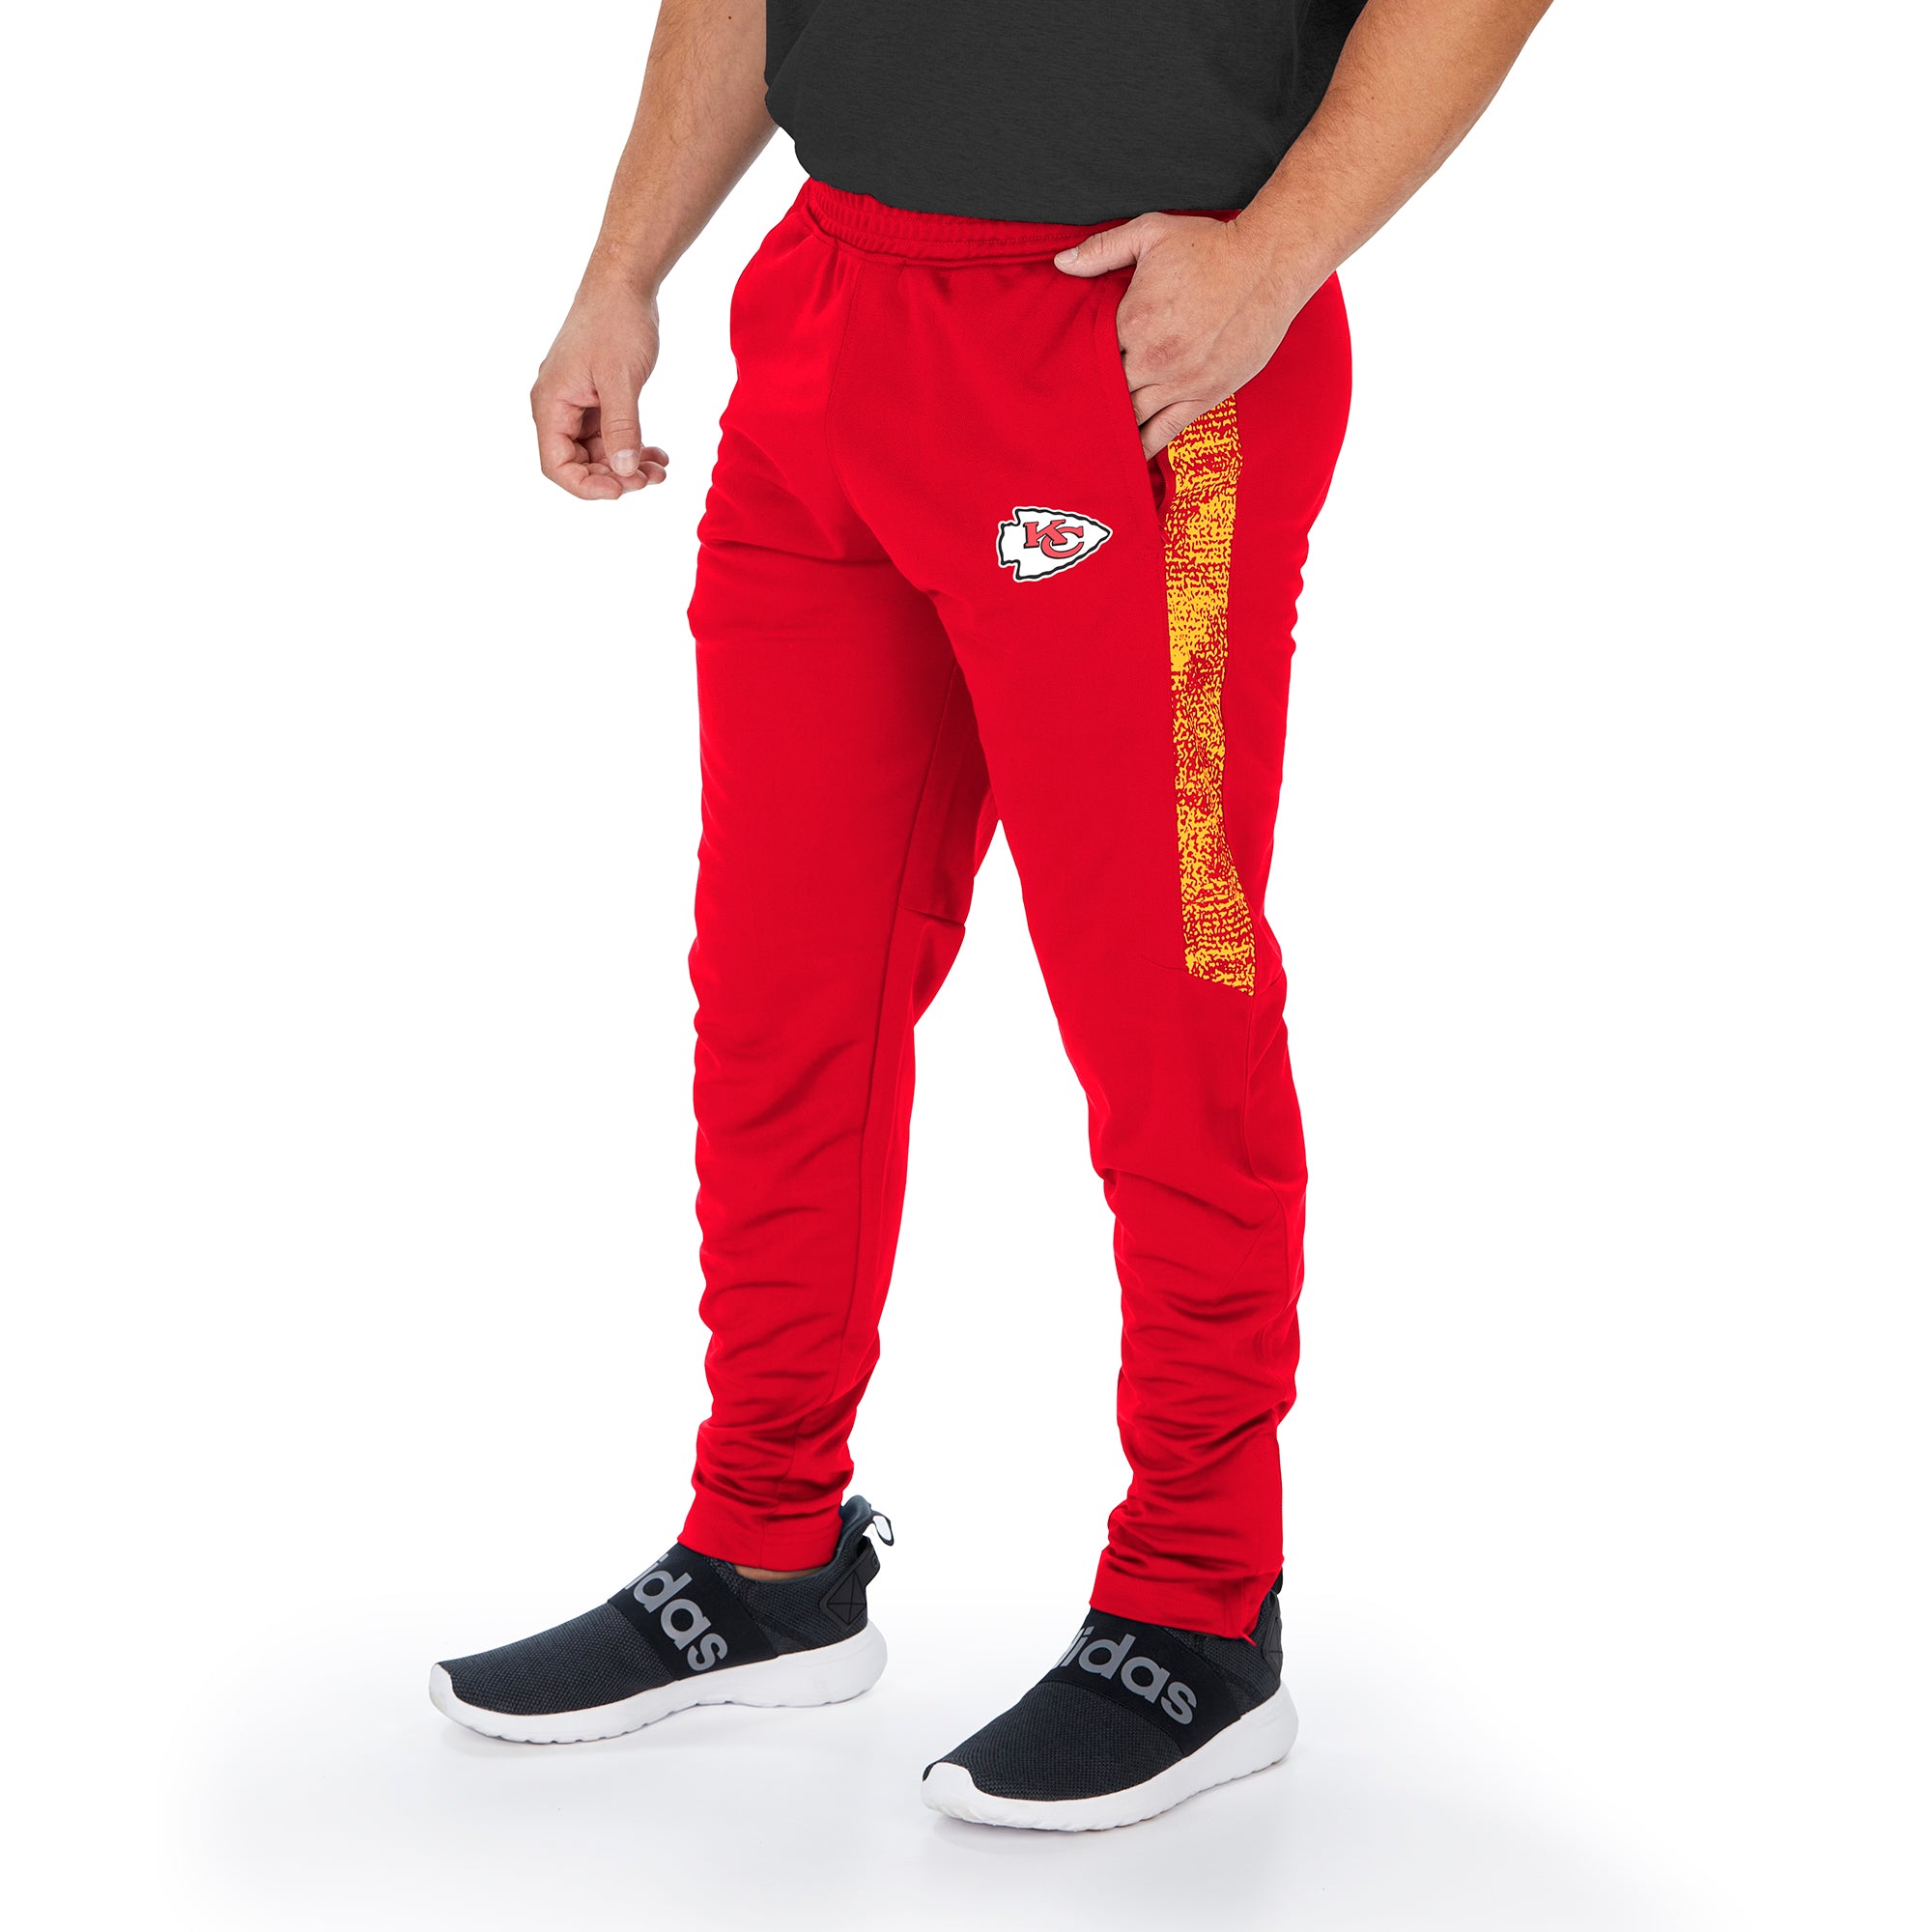 Mens Track Pant Joker shakewell (M, Black, Navy) : Amazon.in: Clothing &  Accessories